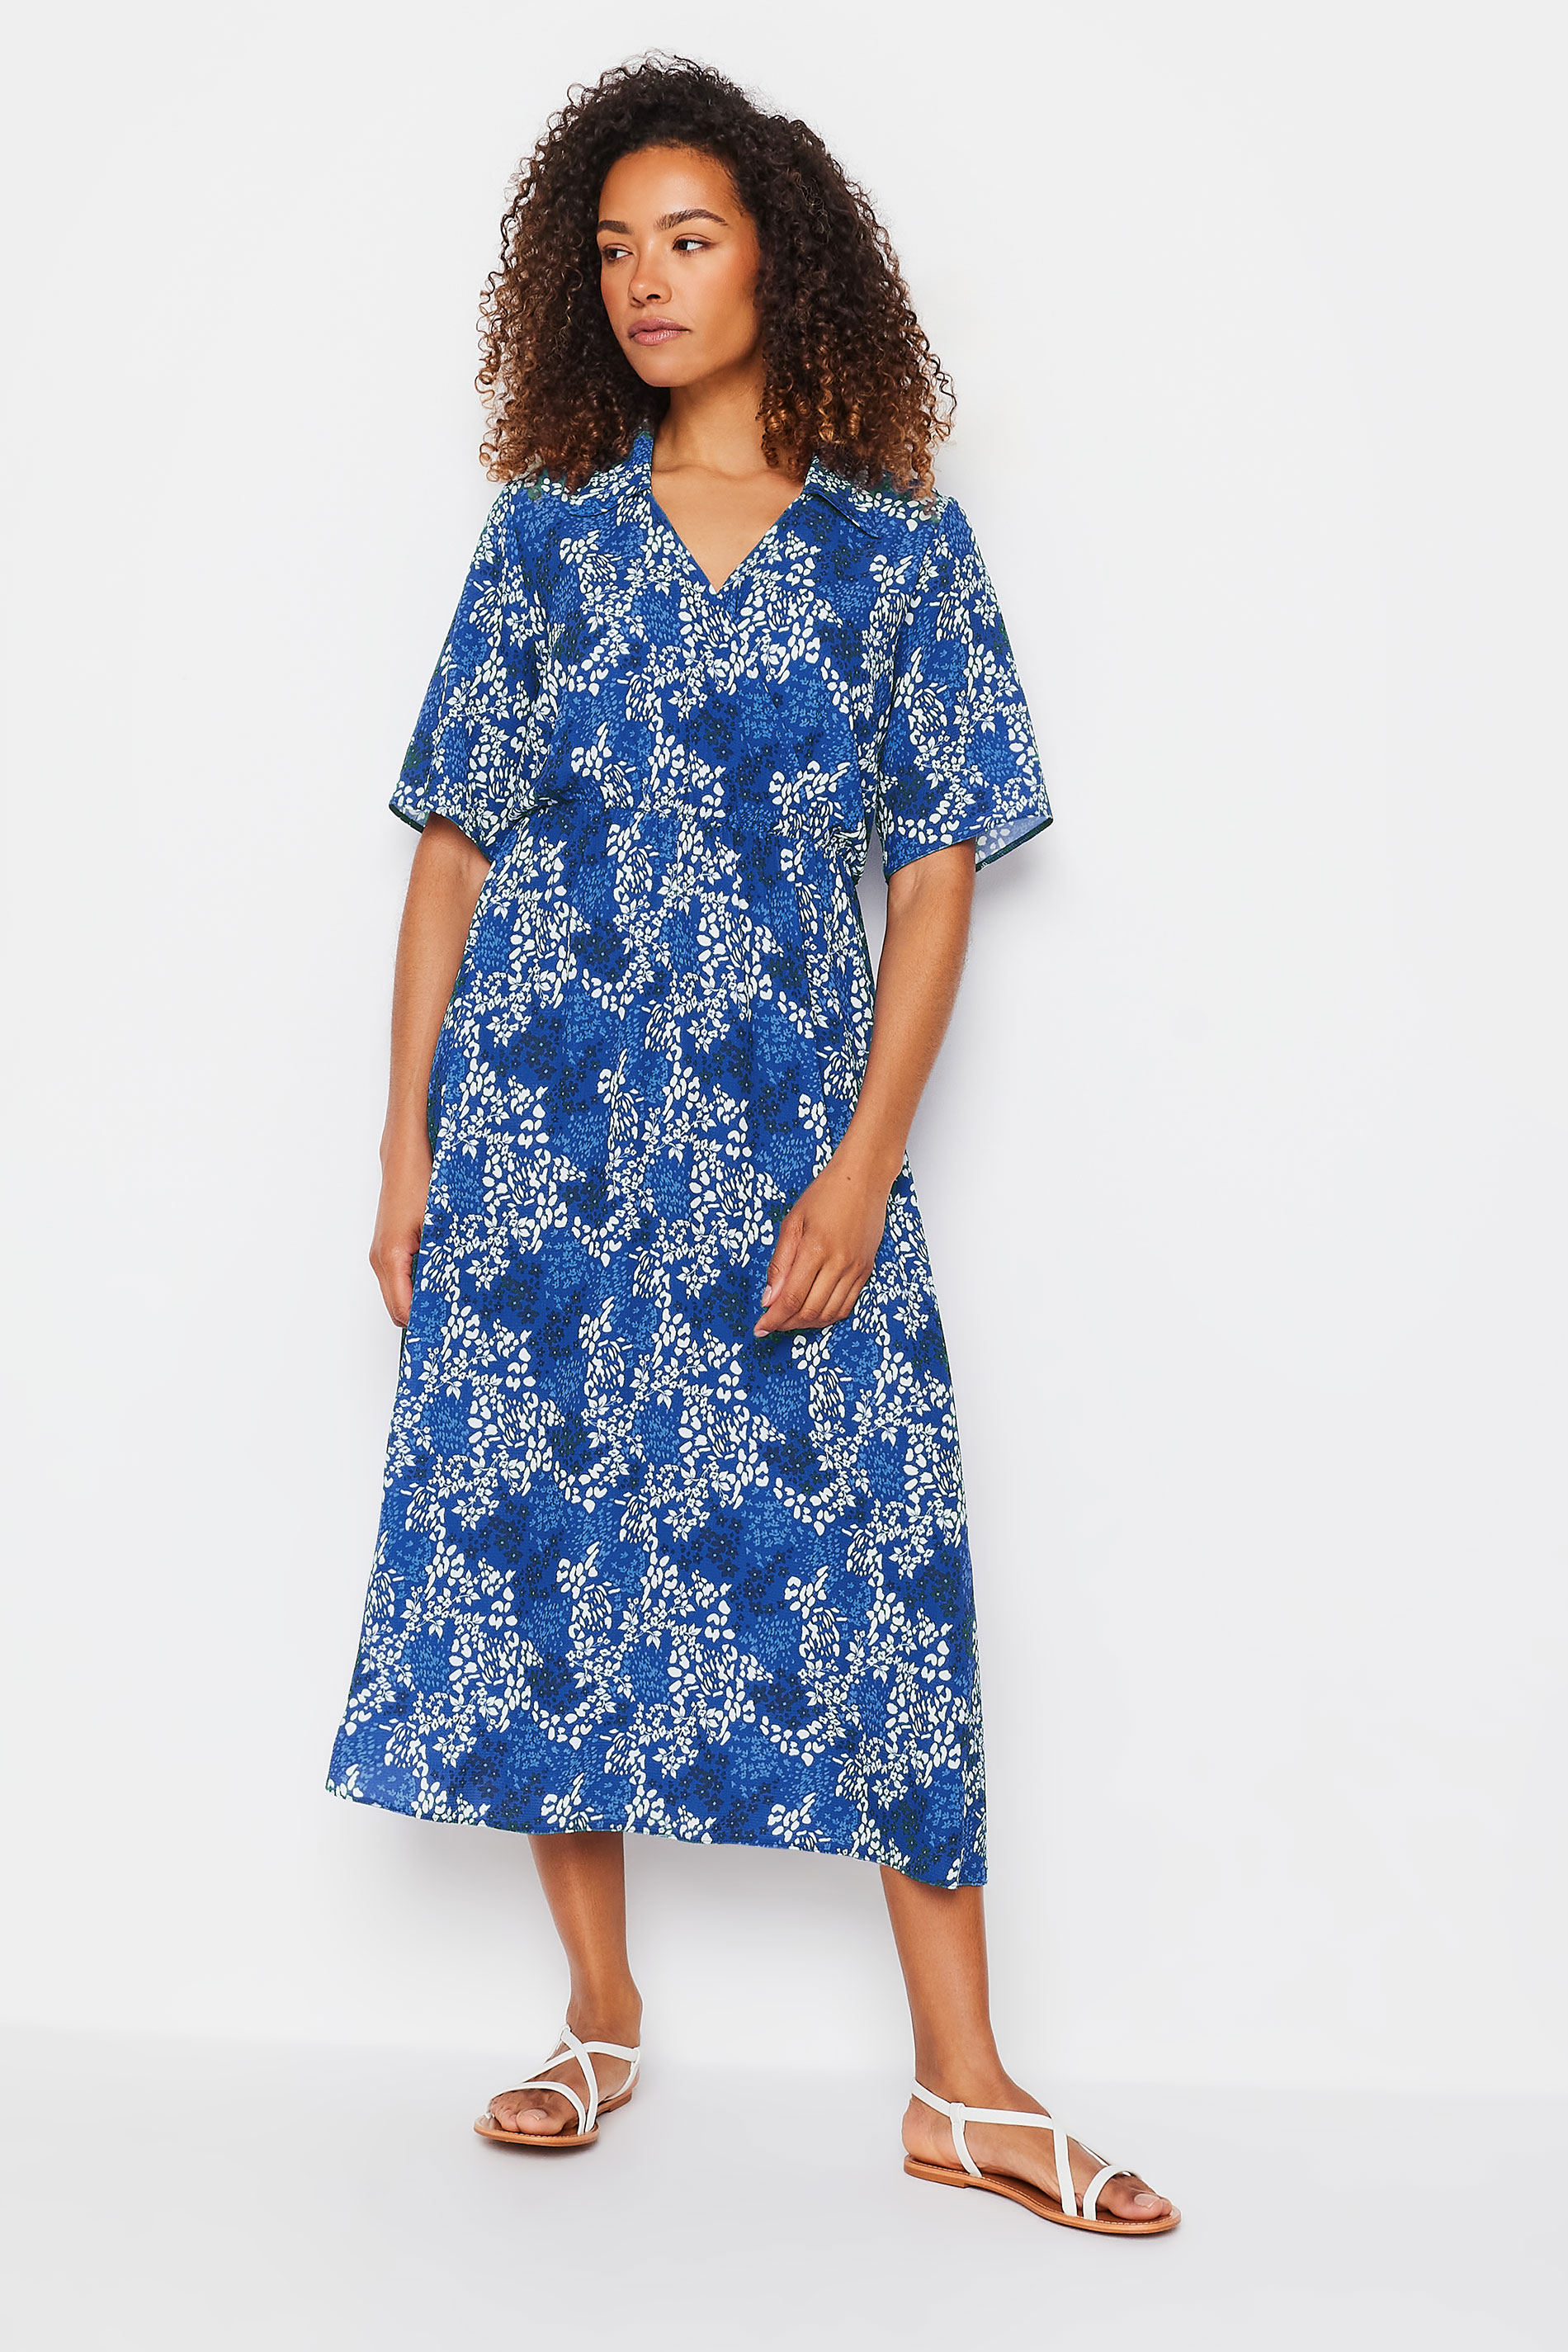 M&Co Blue Abstract Print Midaxi Dress | M&Co 2